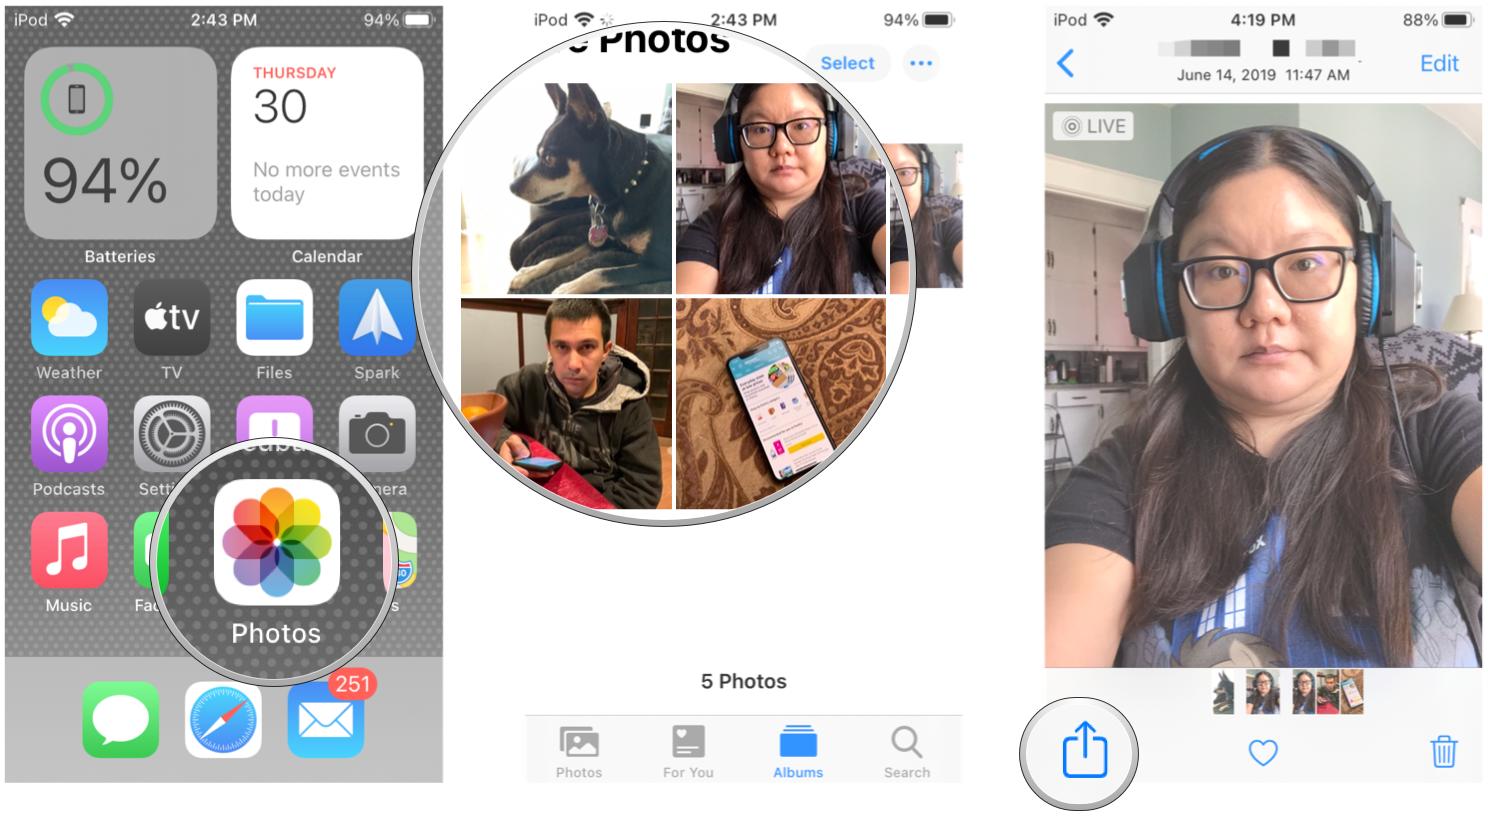 How to stitch together multiple Live Photos to create a video by showing steps: Launch Photos, find the Live Photos you want to stitch together, tap on Share button on one